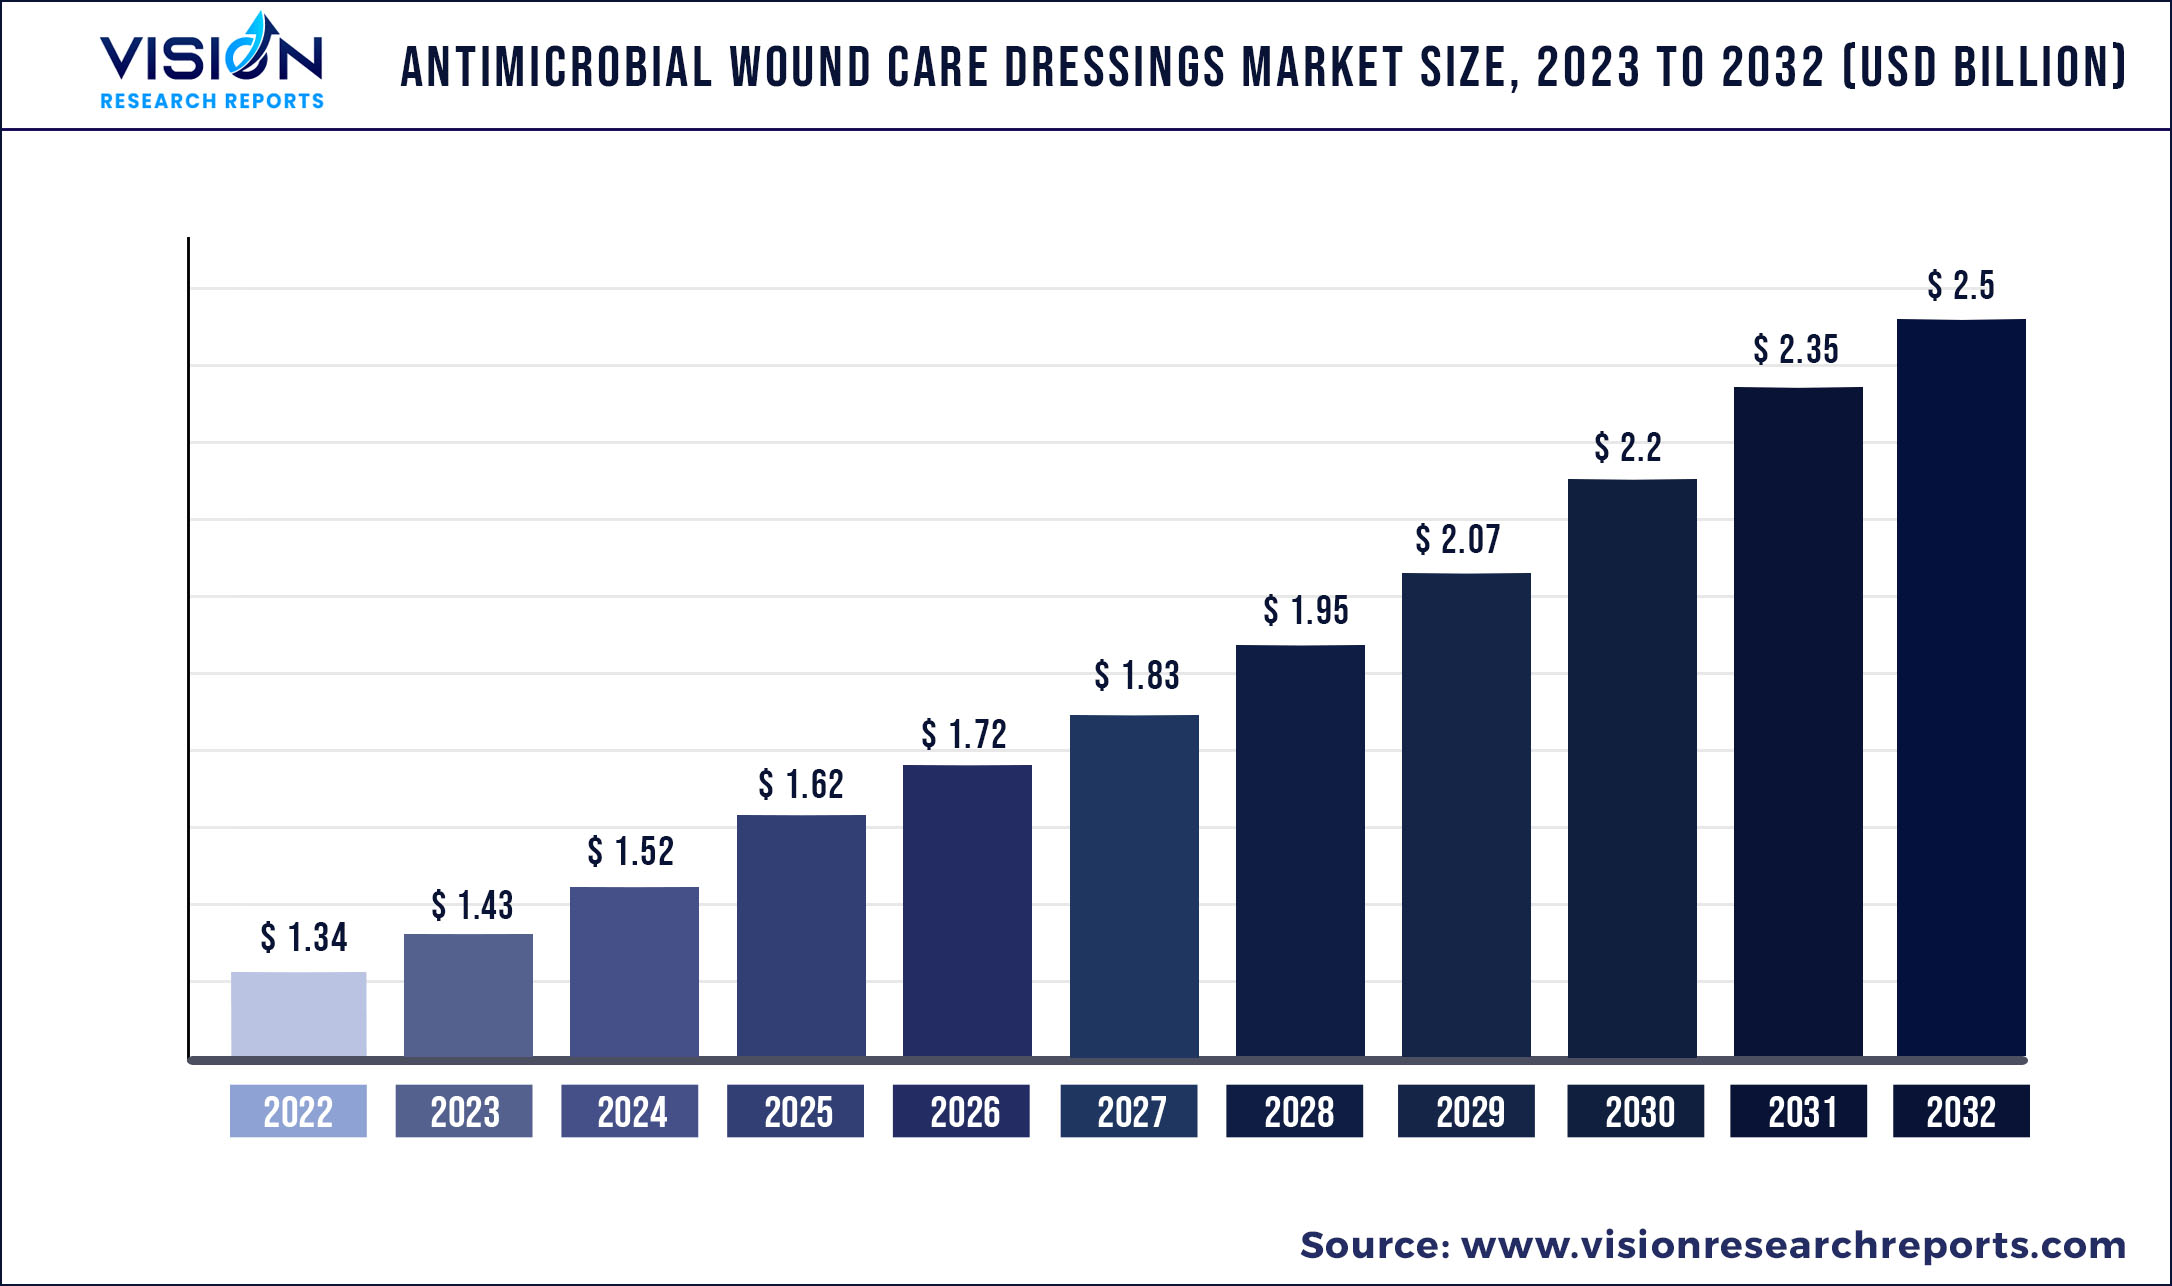 Antimicrobial Wound Care Dressings Market Size 2023 to 2032